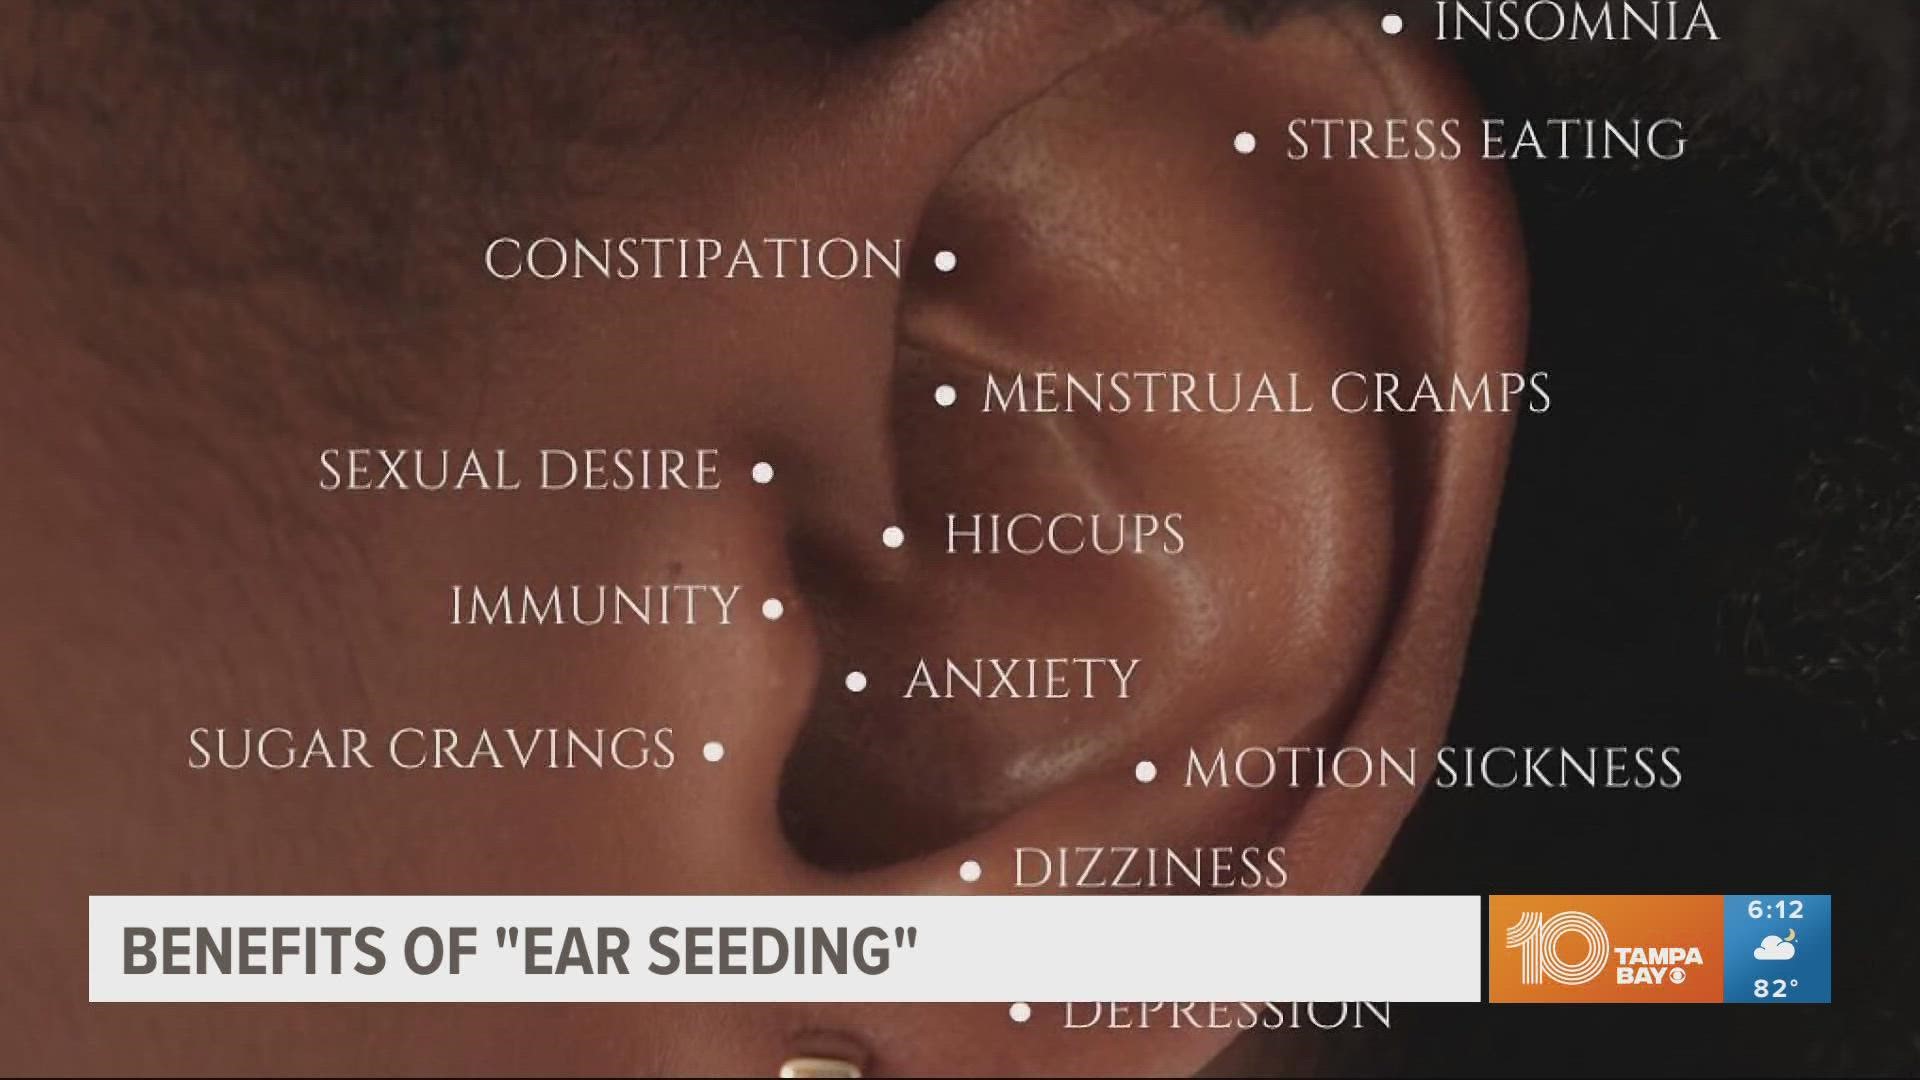 Ear seeding has been a part of traditional Chinese medicine for thousands of years.